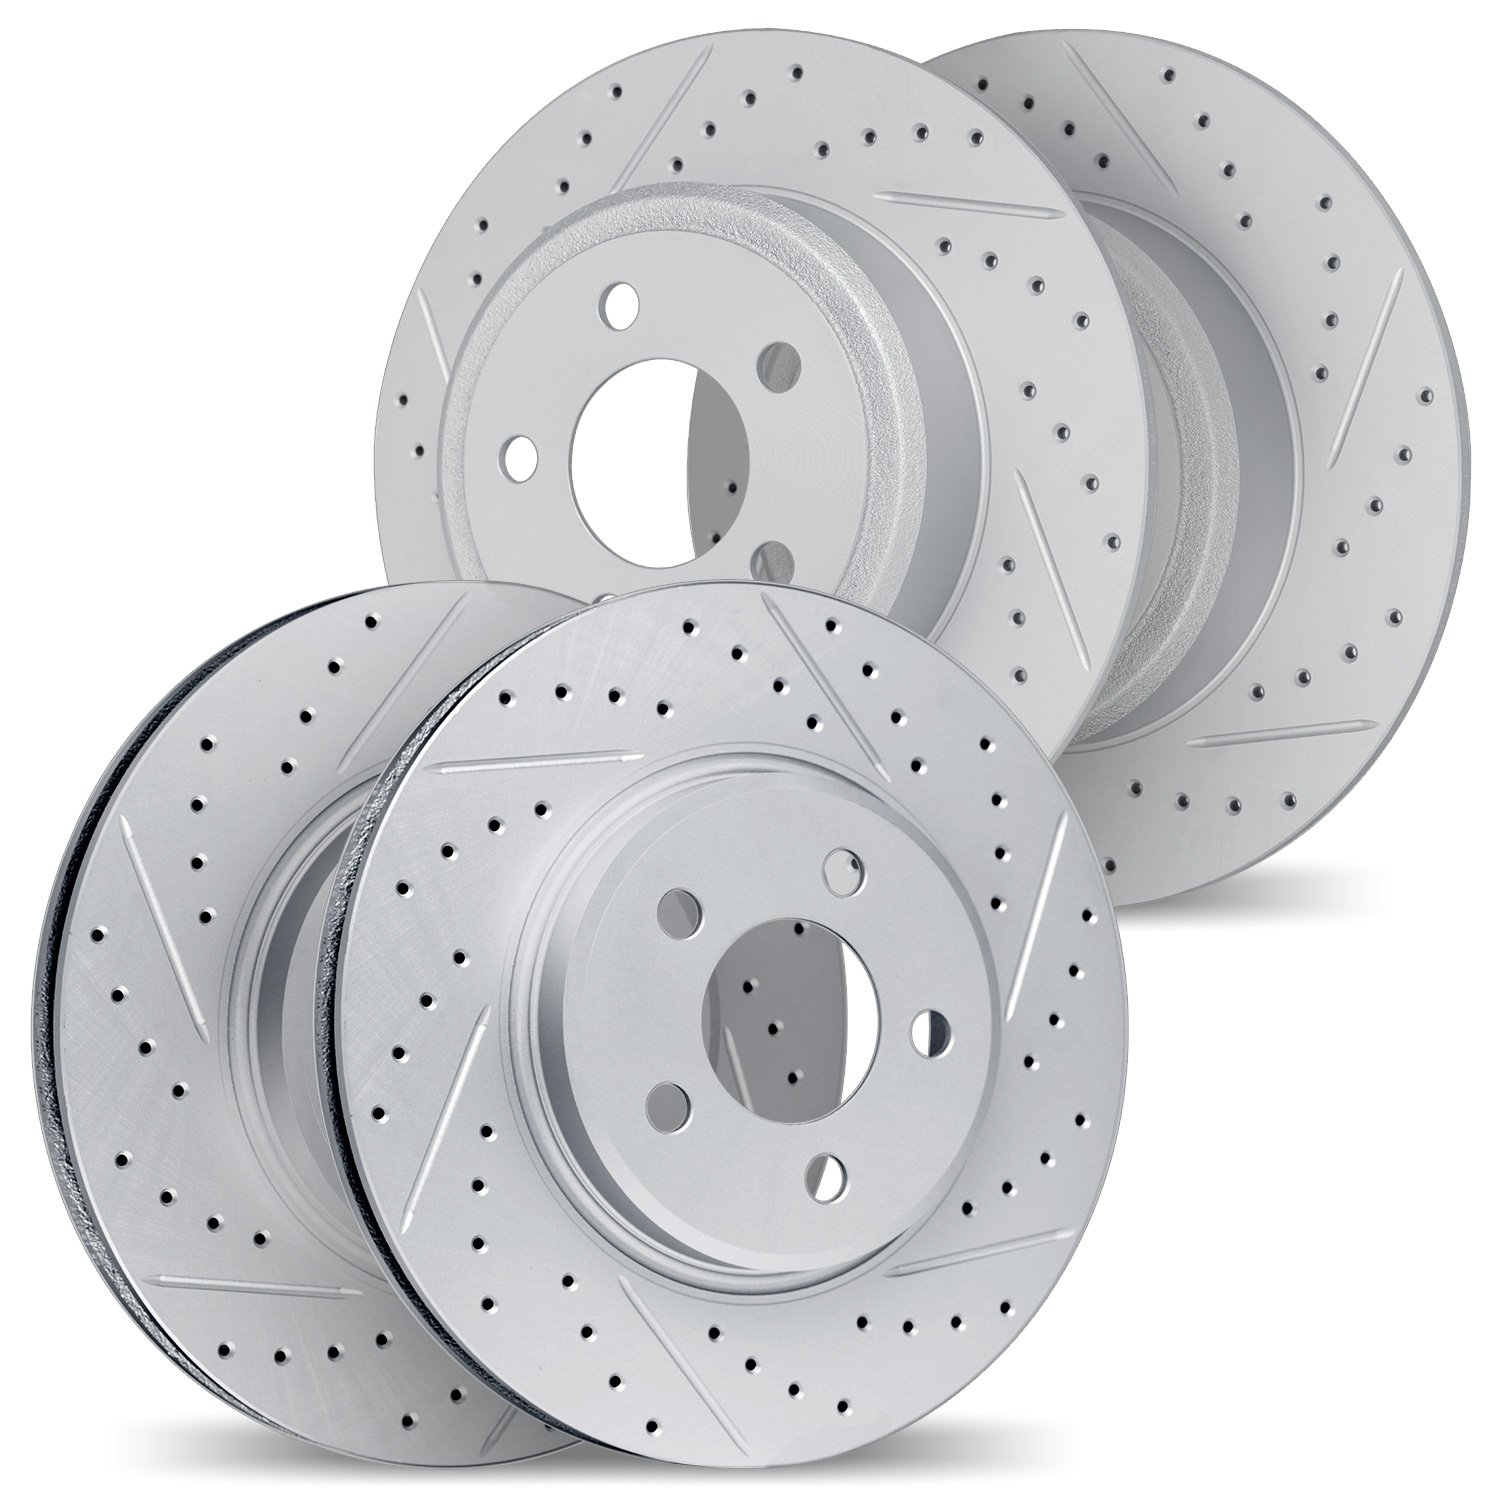 2004-76041 Geoperformance Drilled/Slotted Brake Rotors, Fits Select Lexus/Toyota/Scion, Position: Front and Rear